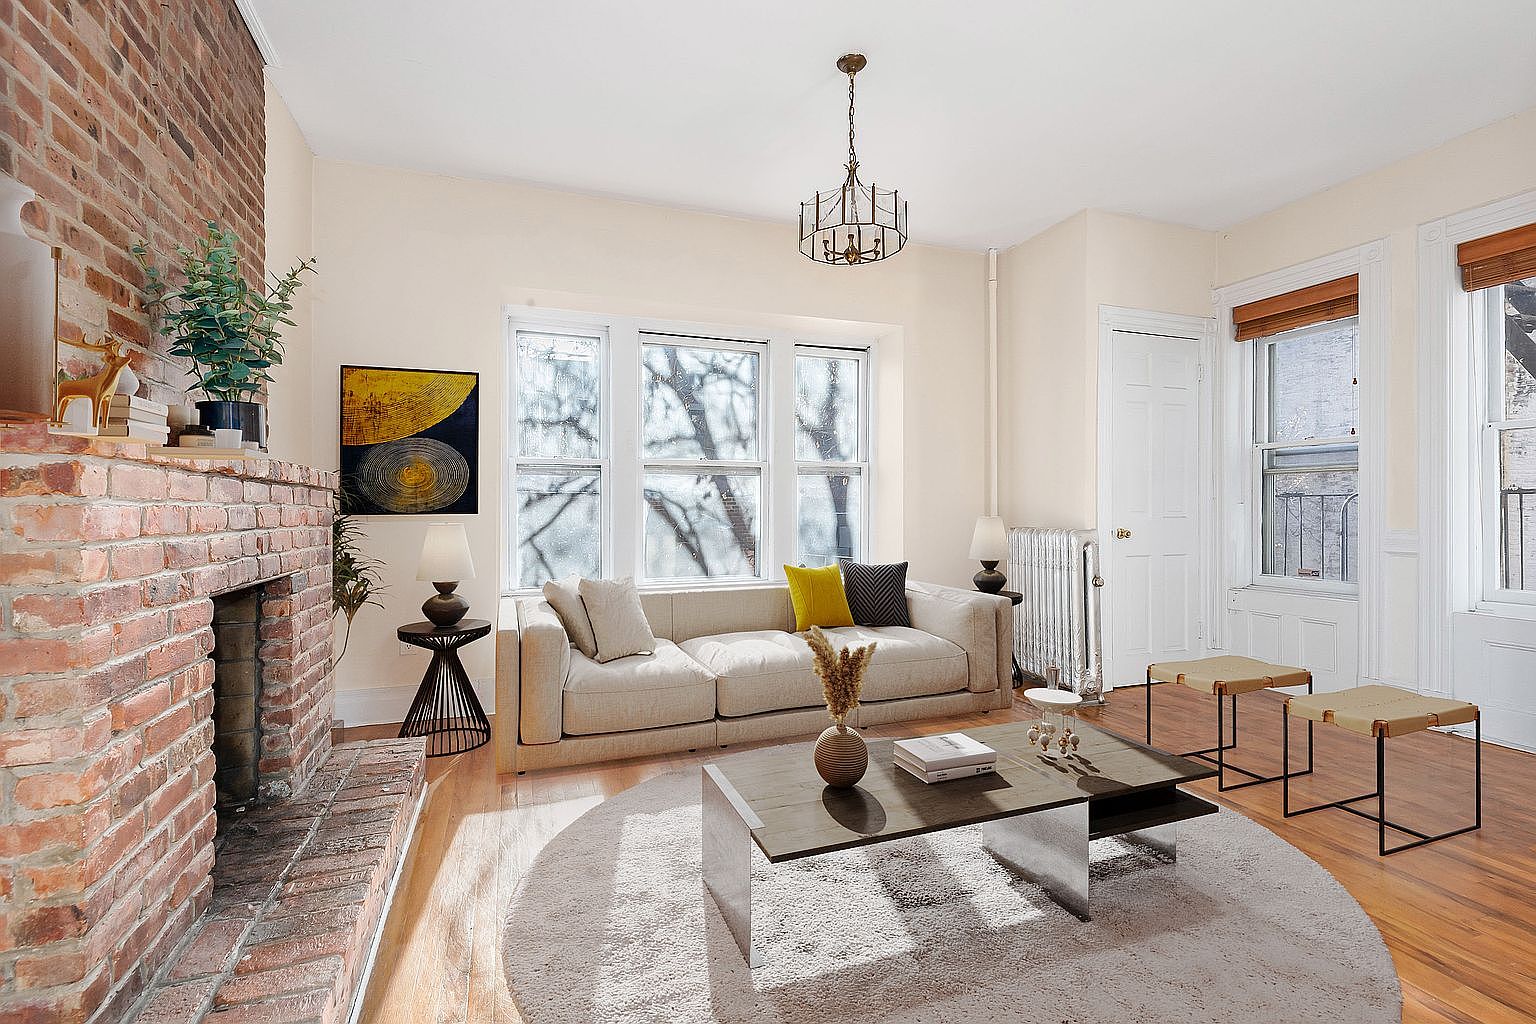 170 State St APT 3E, Brooklyn, NY 11201 | Zillow